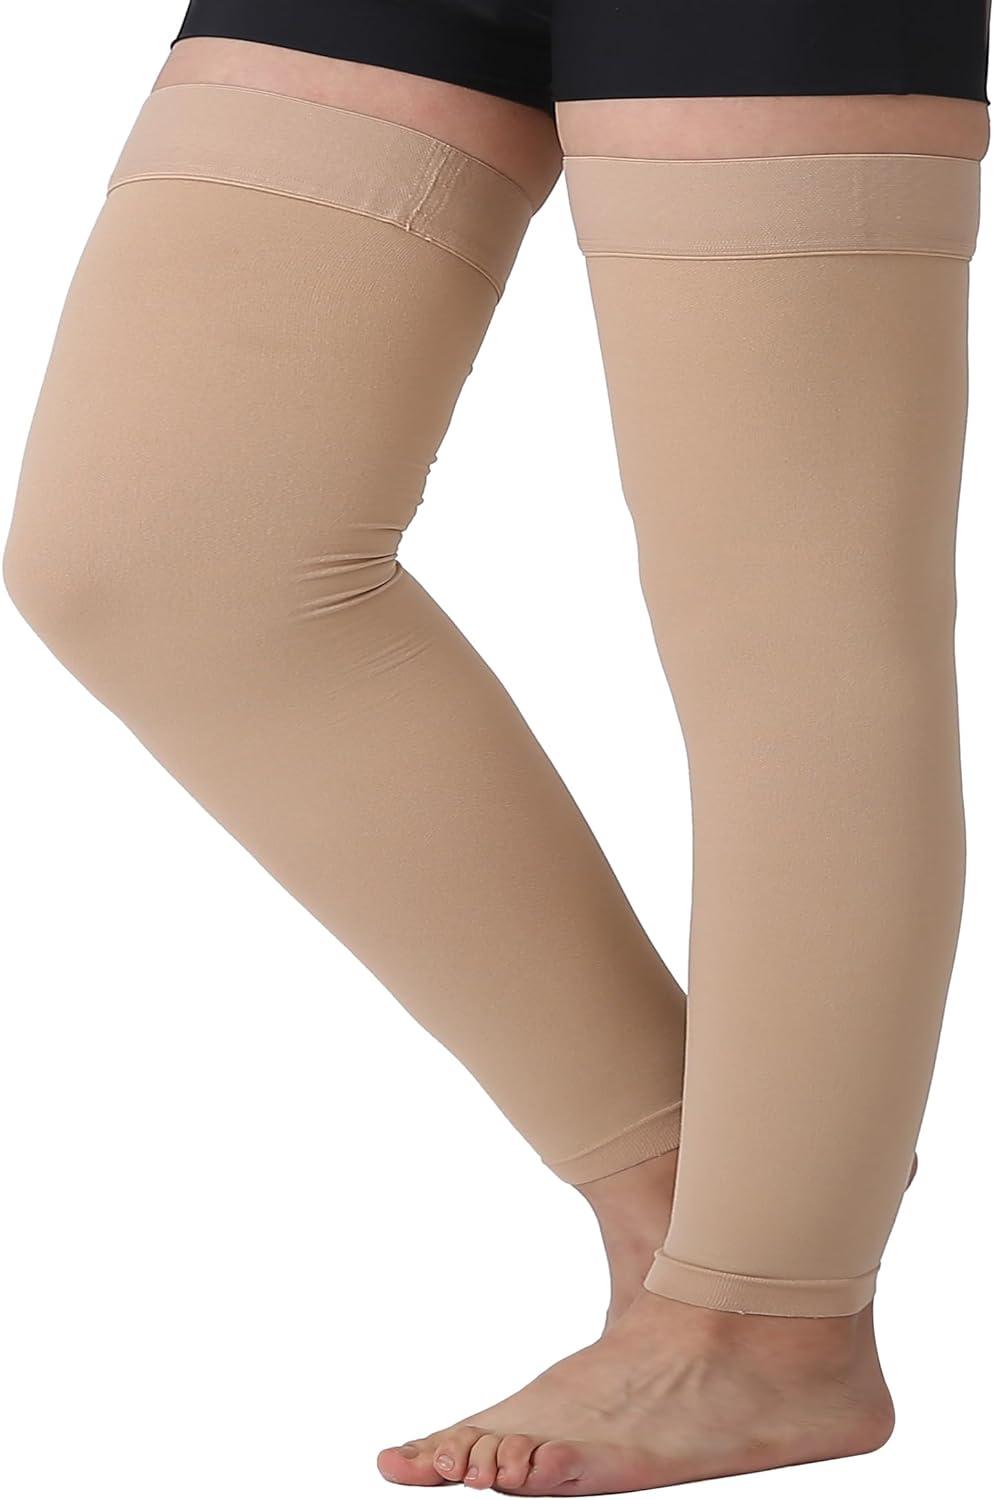 TOFLY Thigh High Compression Stockings Opaque 1 Pair Firm Support 20-30 mmHg  Gradient Compression with Silicone Band Footless Compression Sleeves  Treatment Swelling Varicose Veins Edema. M 15-20mmhg Beige